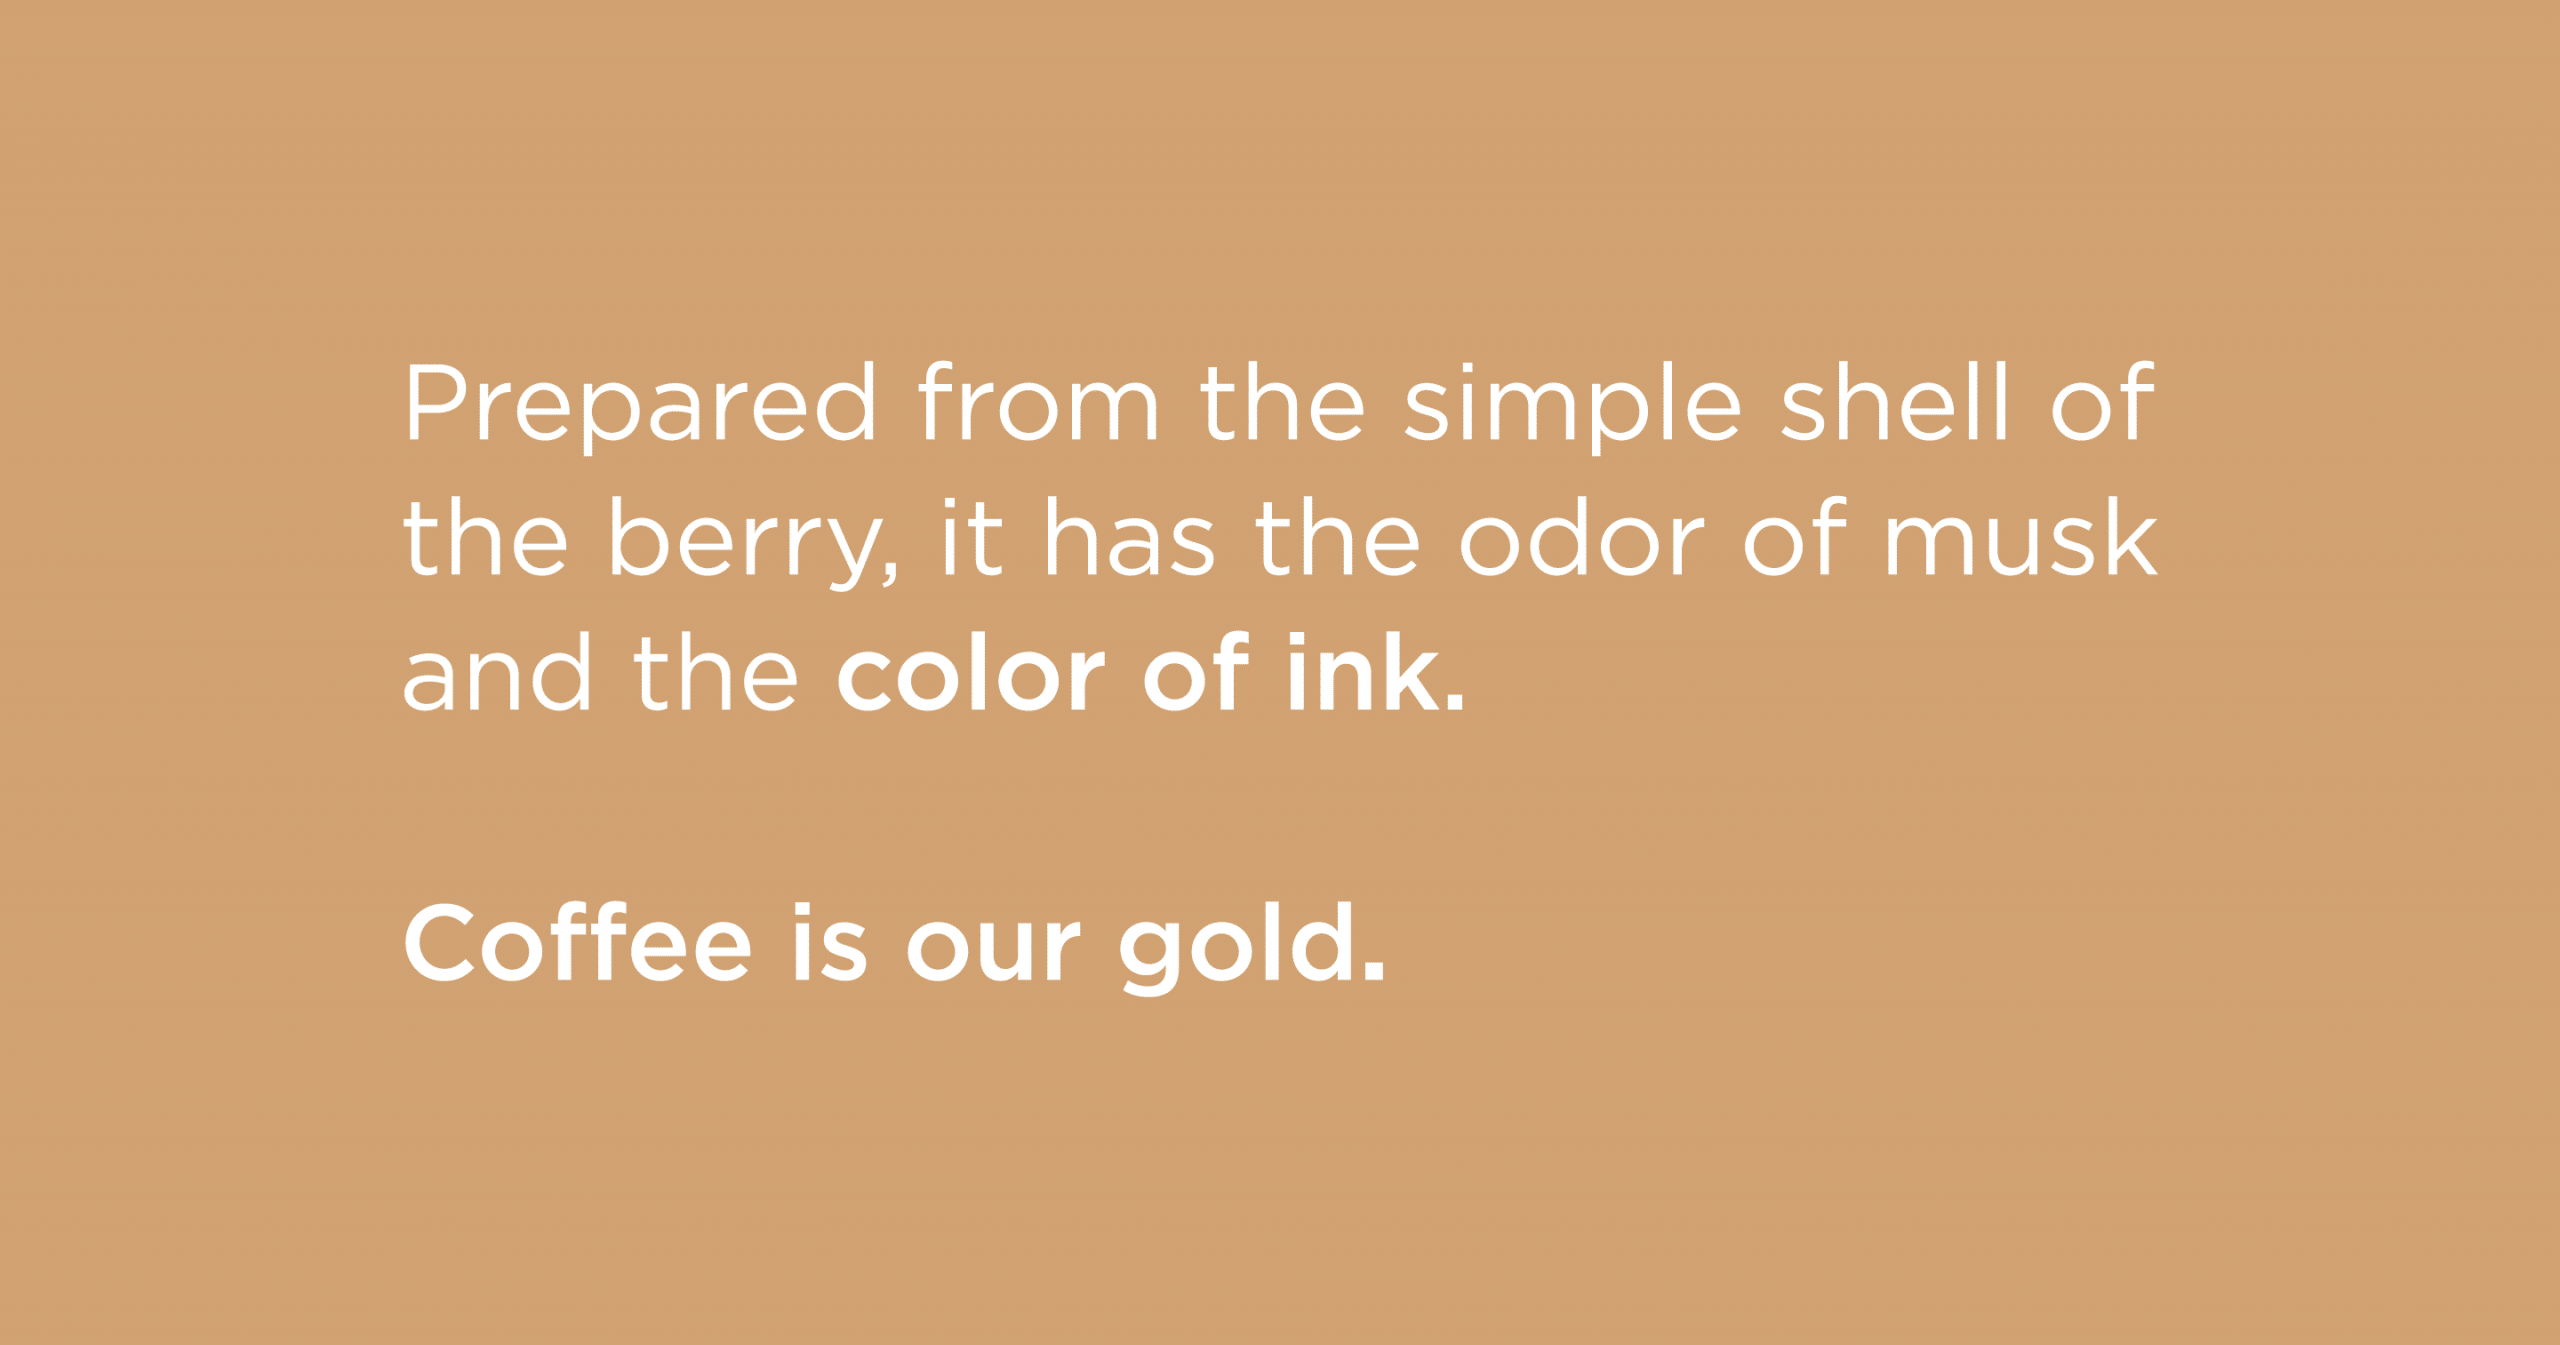 Coffee is our gold